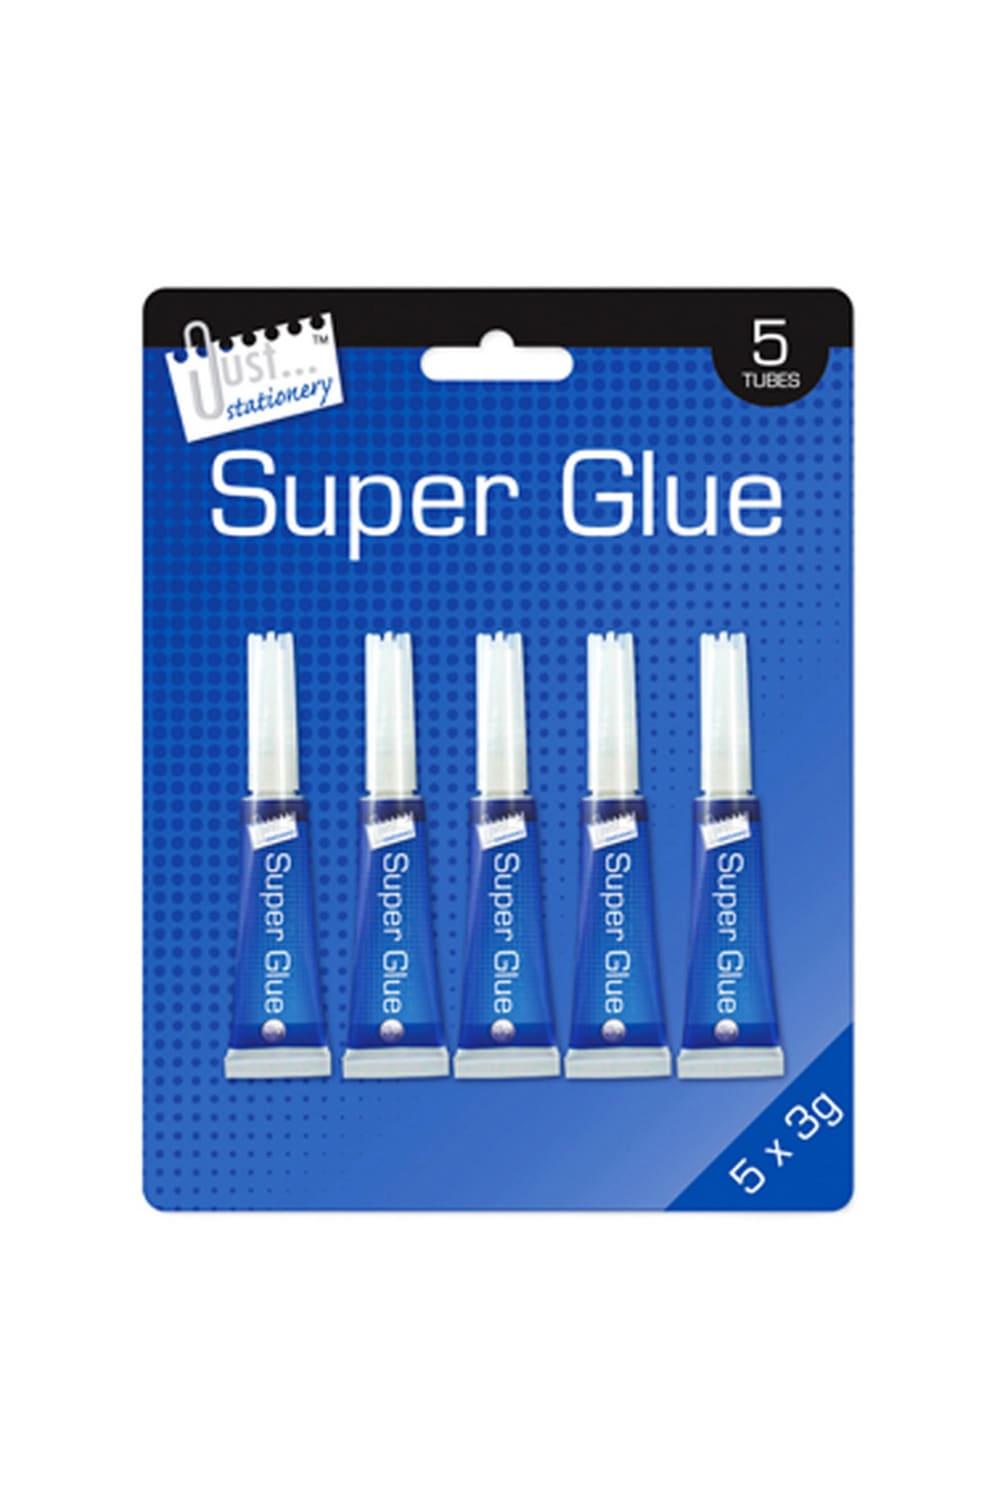 Just Stationery 3g Tube Super Glue (Pack Of 5) (Clear) (One Size)